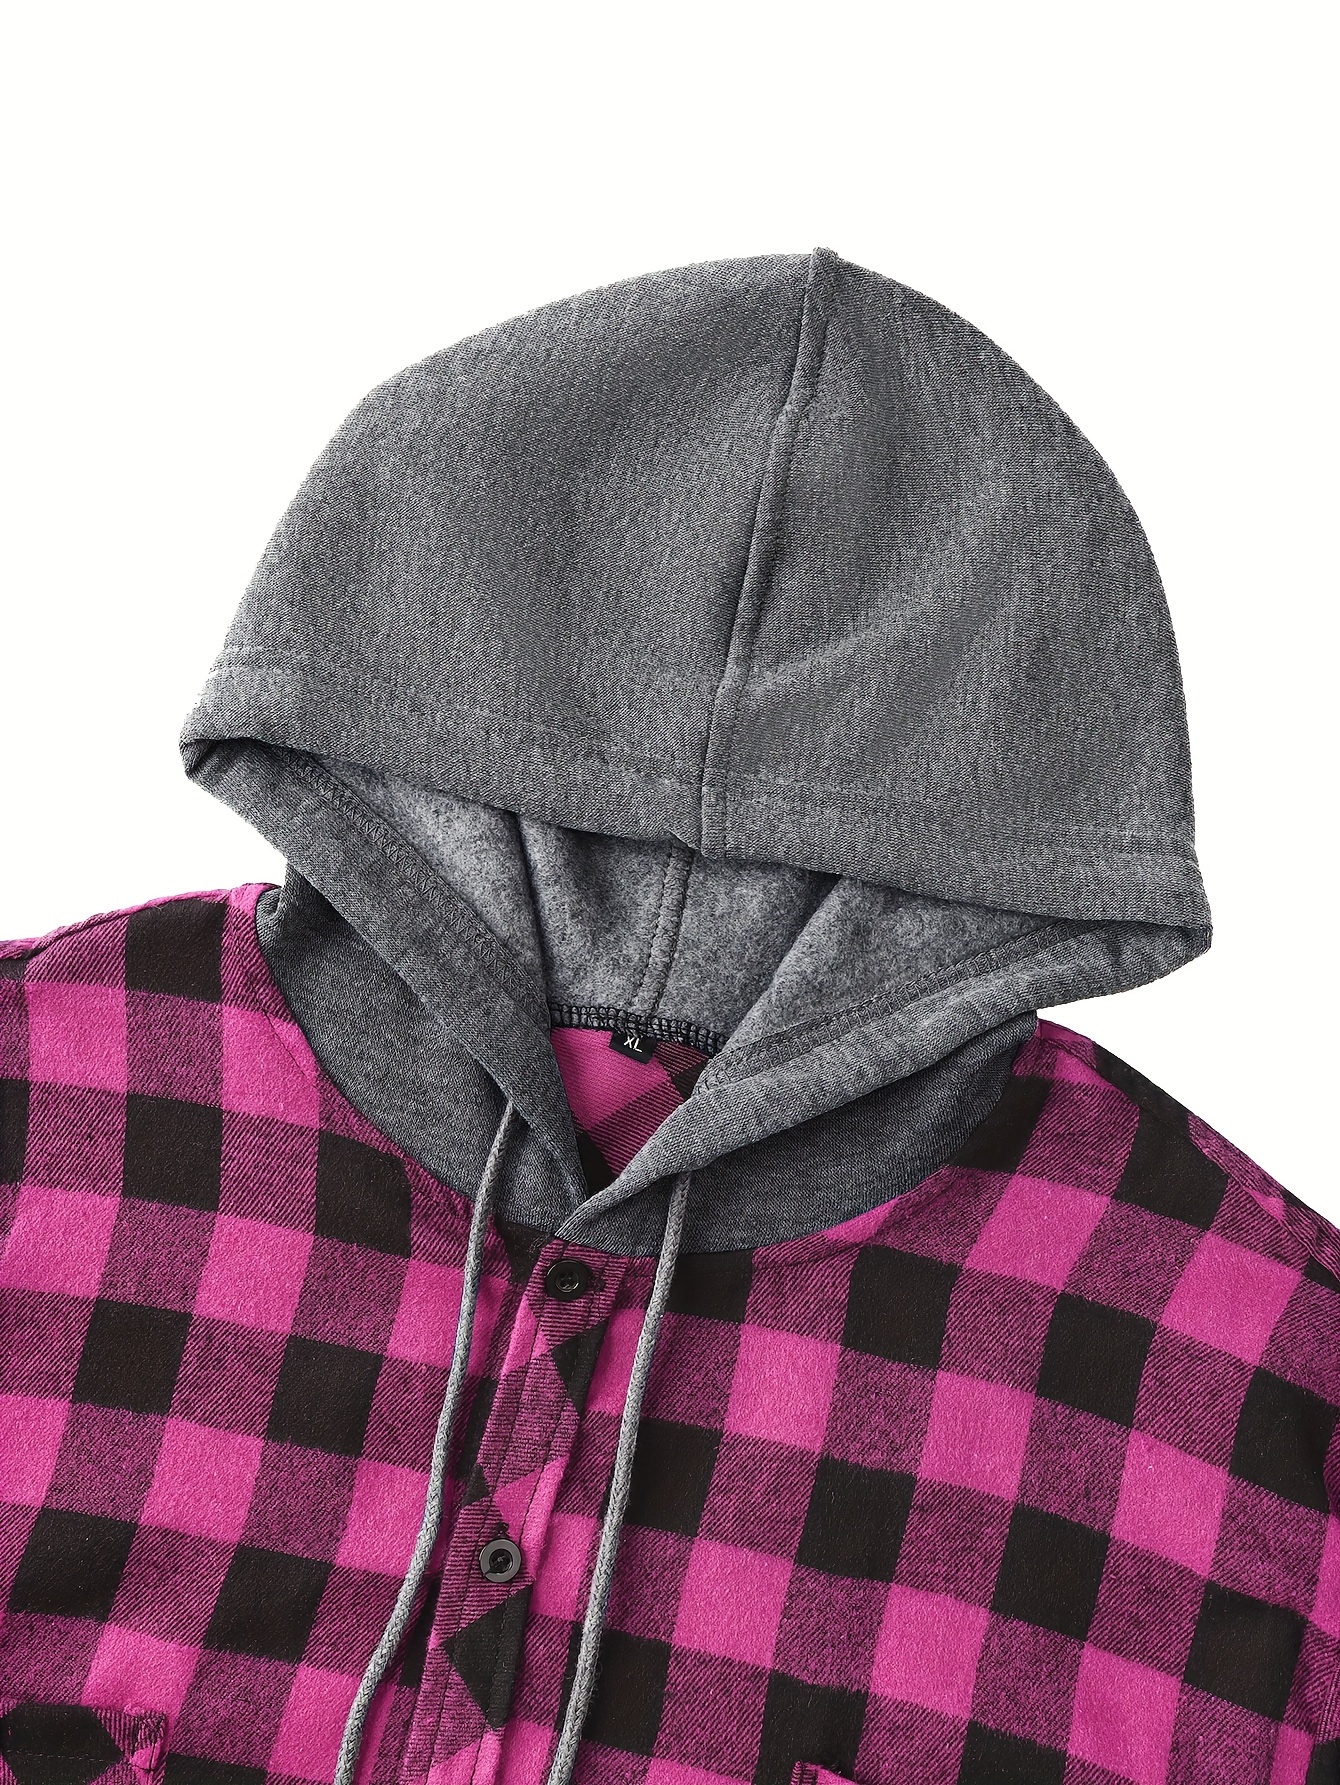 long sleeve casual regular fit button up hooded shirts jacket plaid shirt coat for men details 17